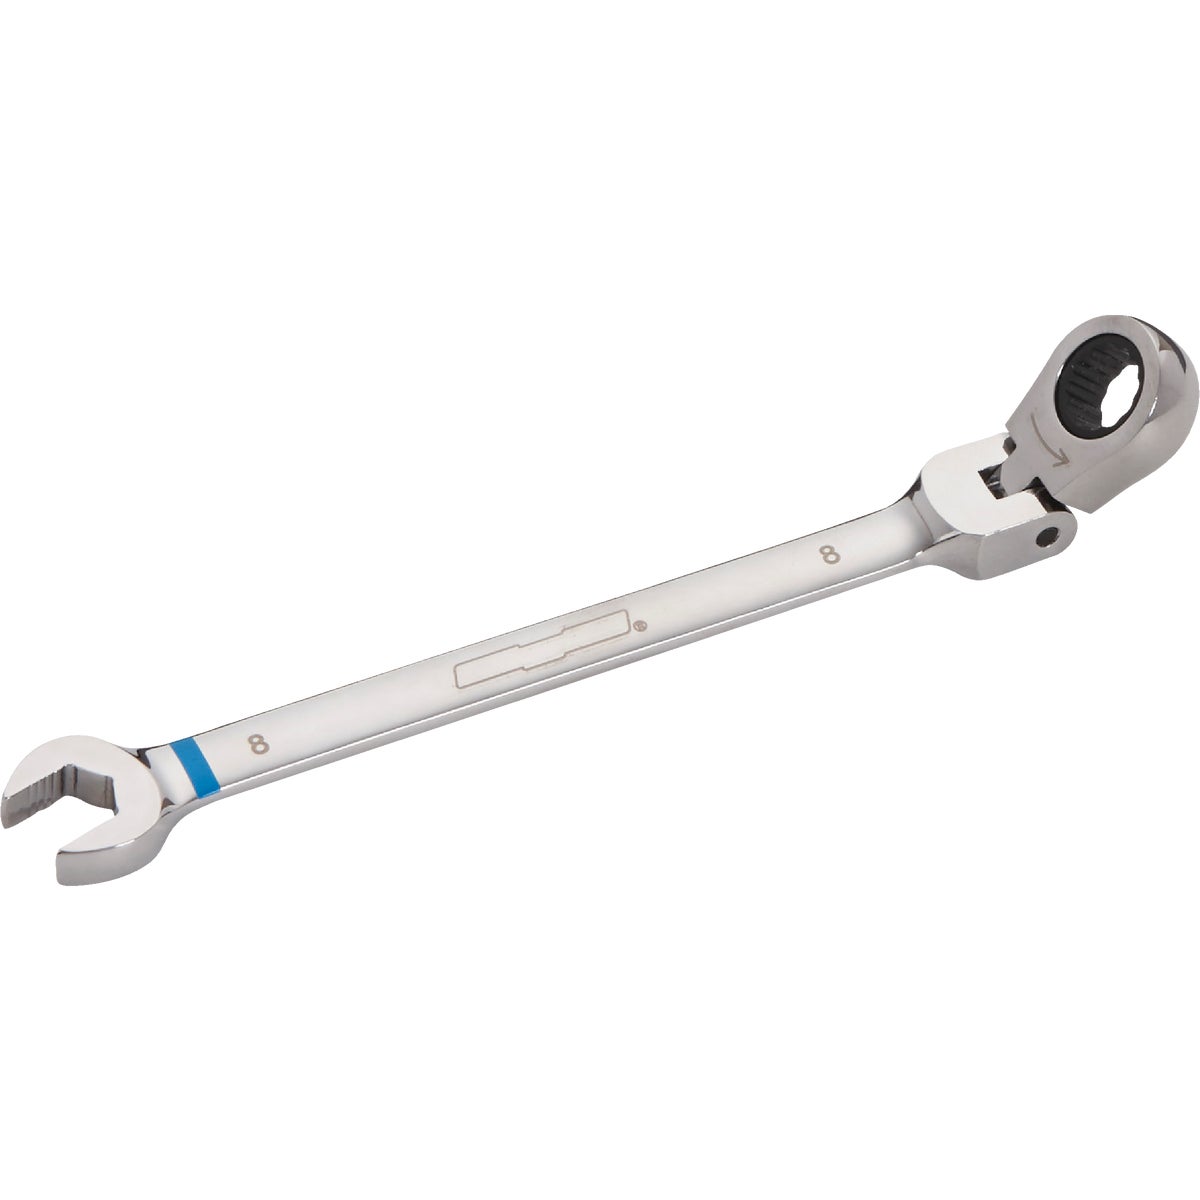 Channellock Metric 8 mm 12-Point Ratcheting Flex-Head Wrench